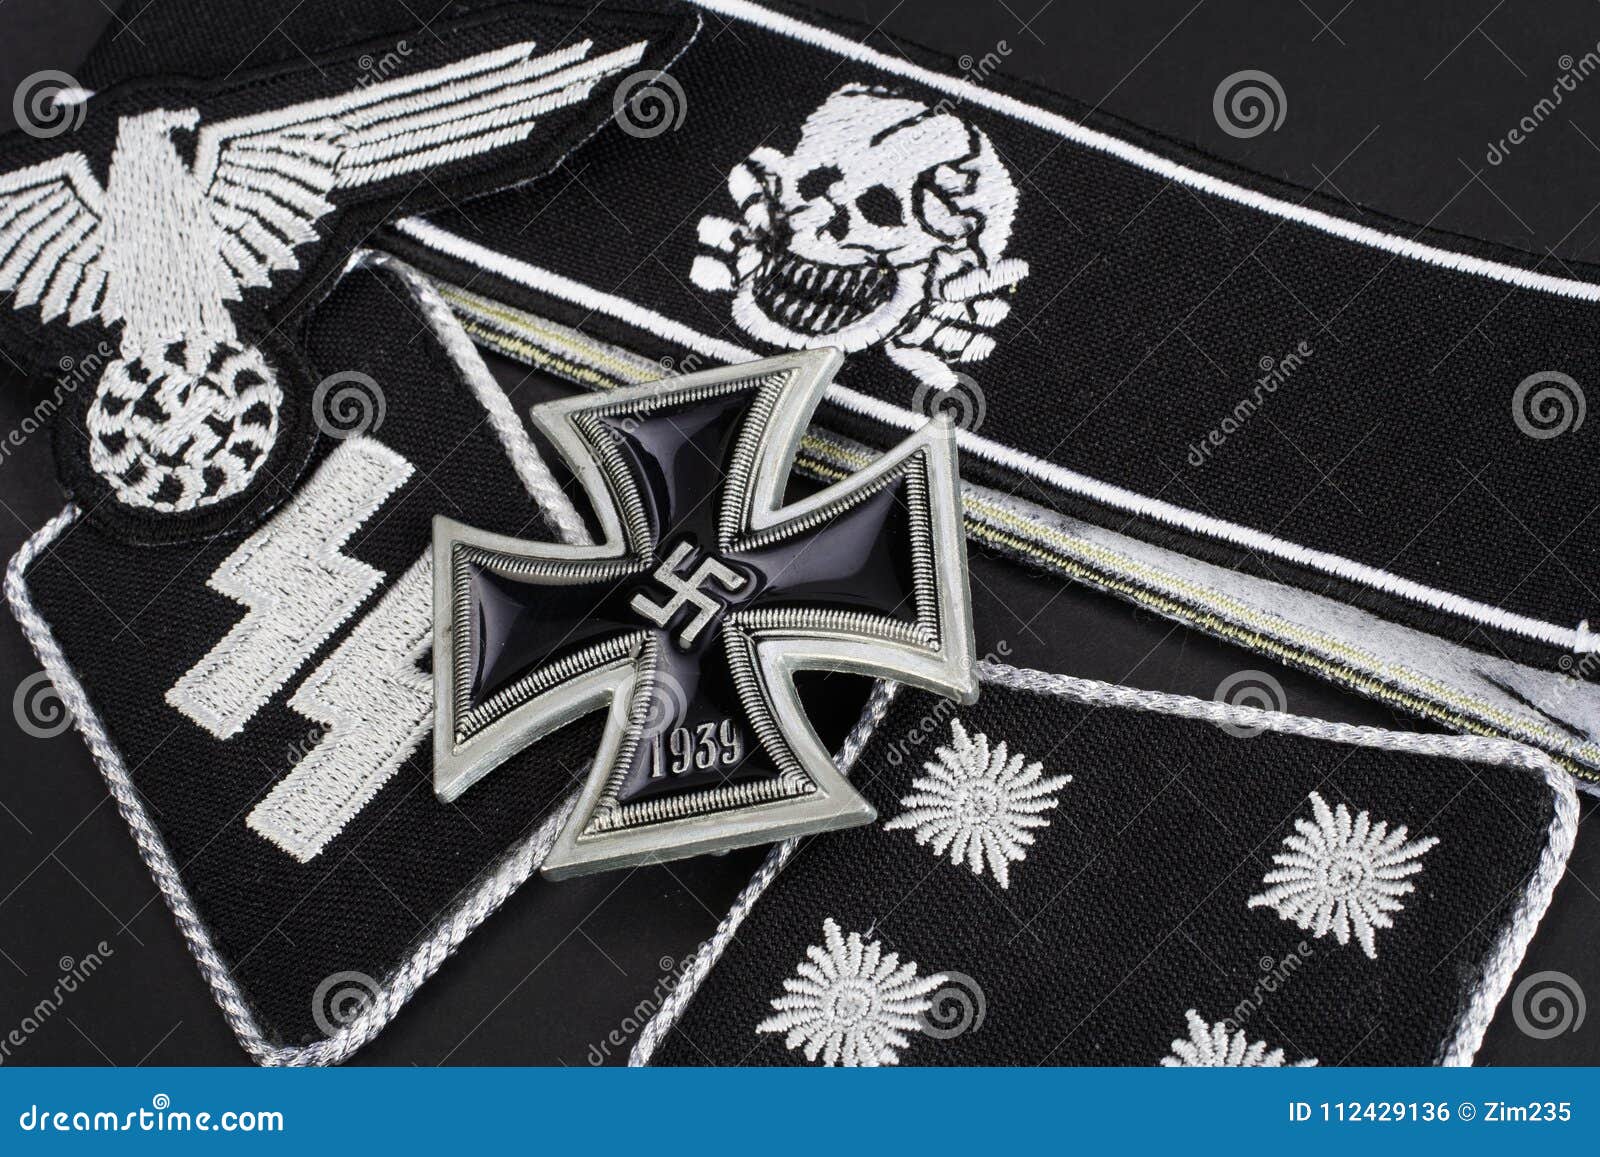 #96 - Main news thread - conflicts, terrorism, crisis from around the globe - Page 11 Ww-german-waffen-ss-military-insignia-iron-cross-award-background-ww-german-waffen-ss-military-insignia-iron-cross-award-112429136